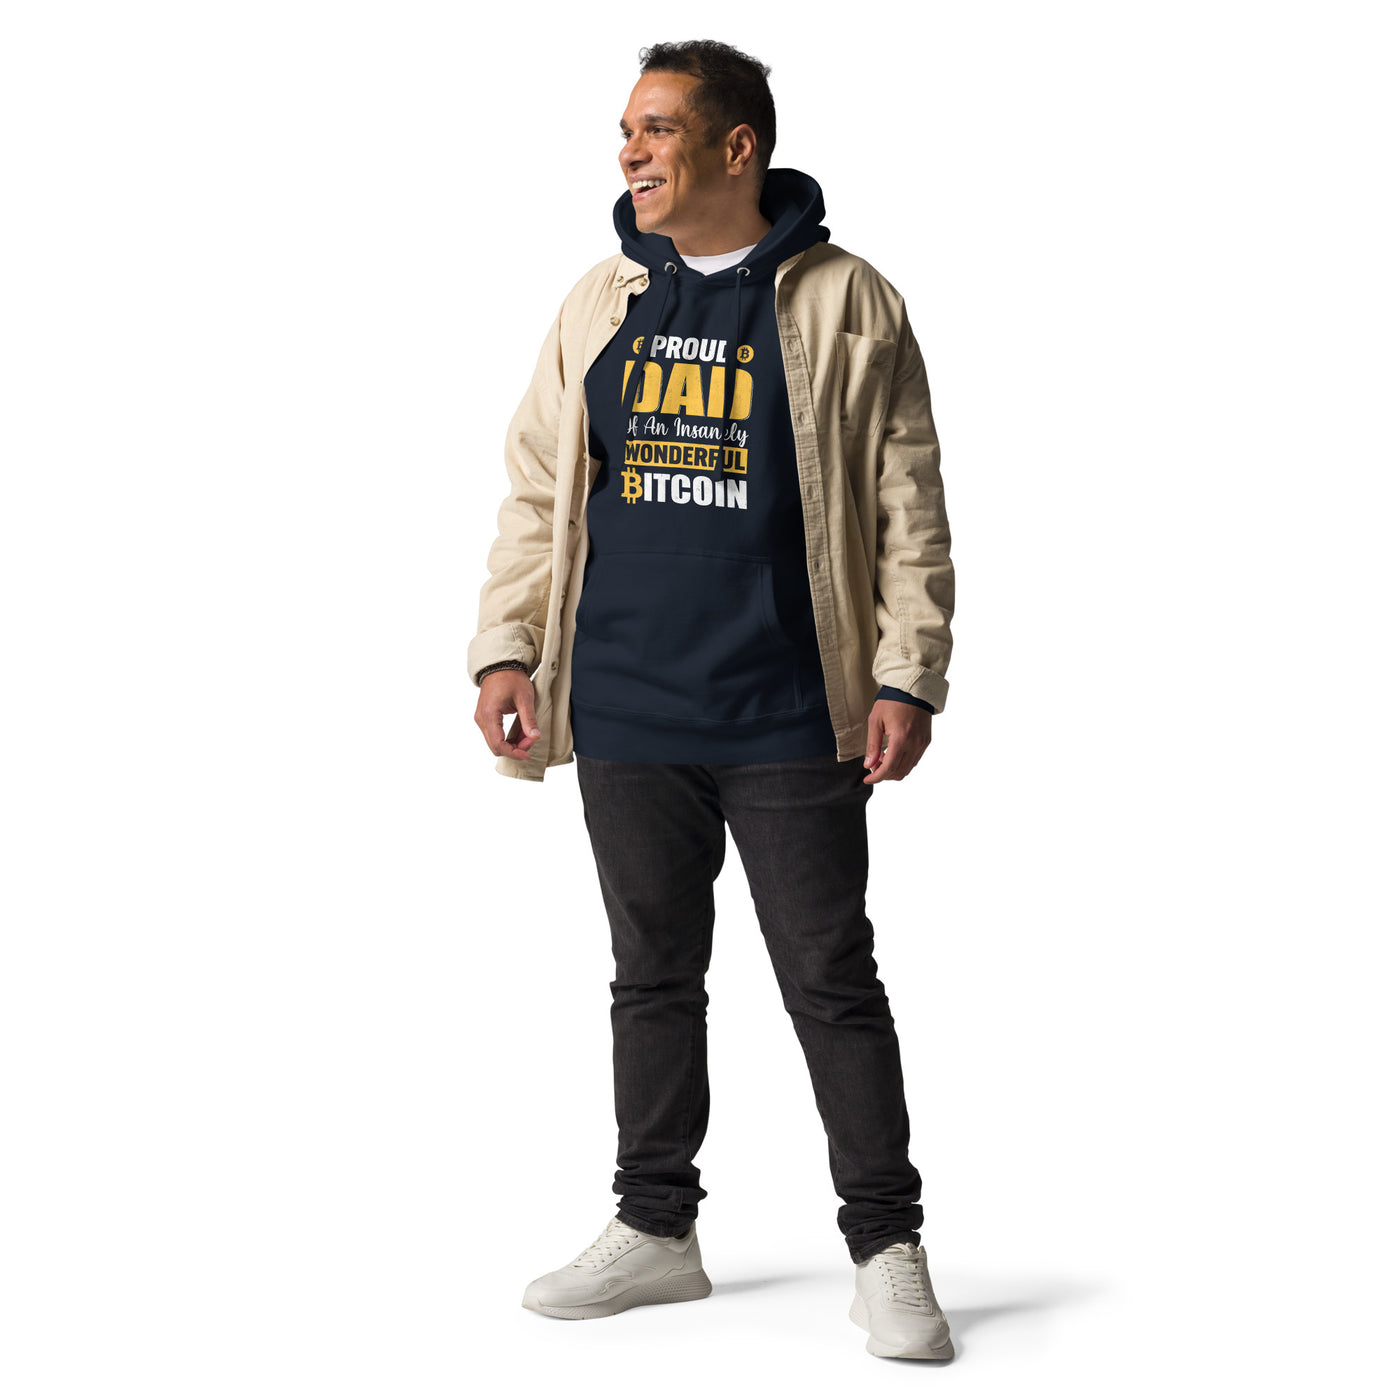 Proud Dad of an insanely wonderful Bitcoin Unisex Hoodie